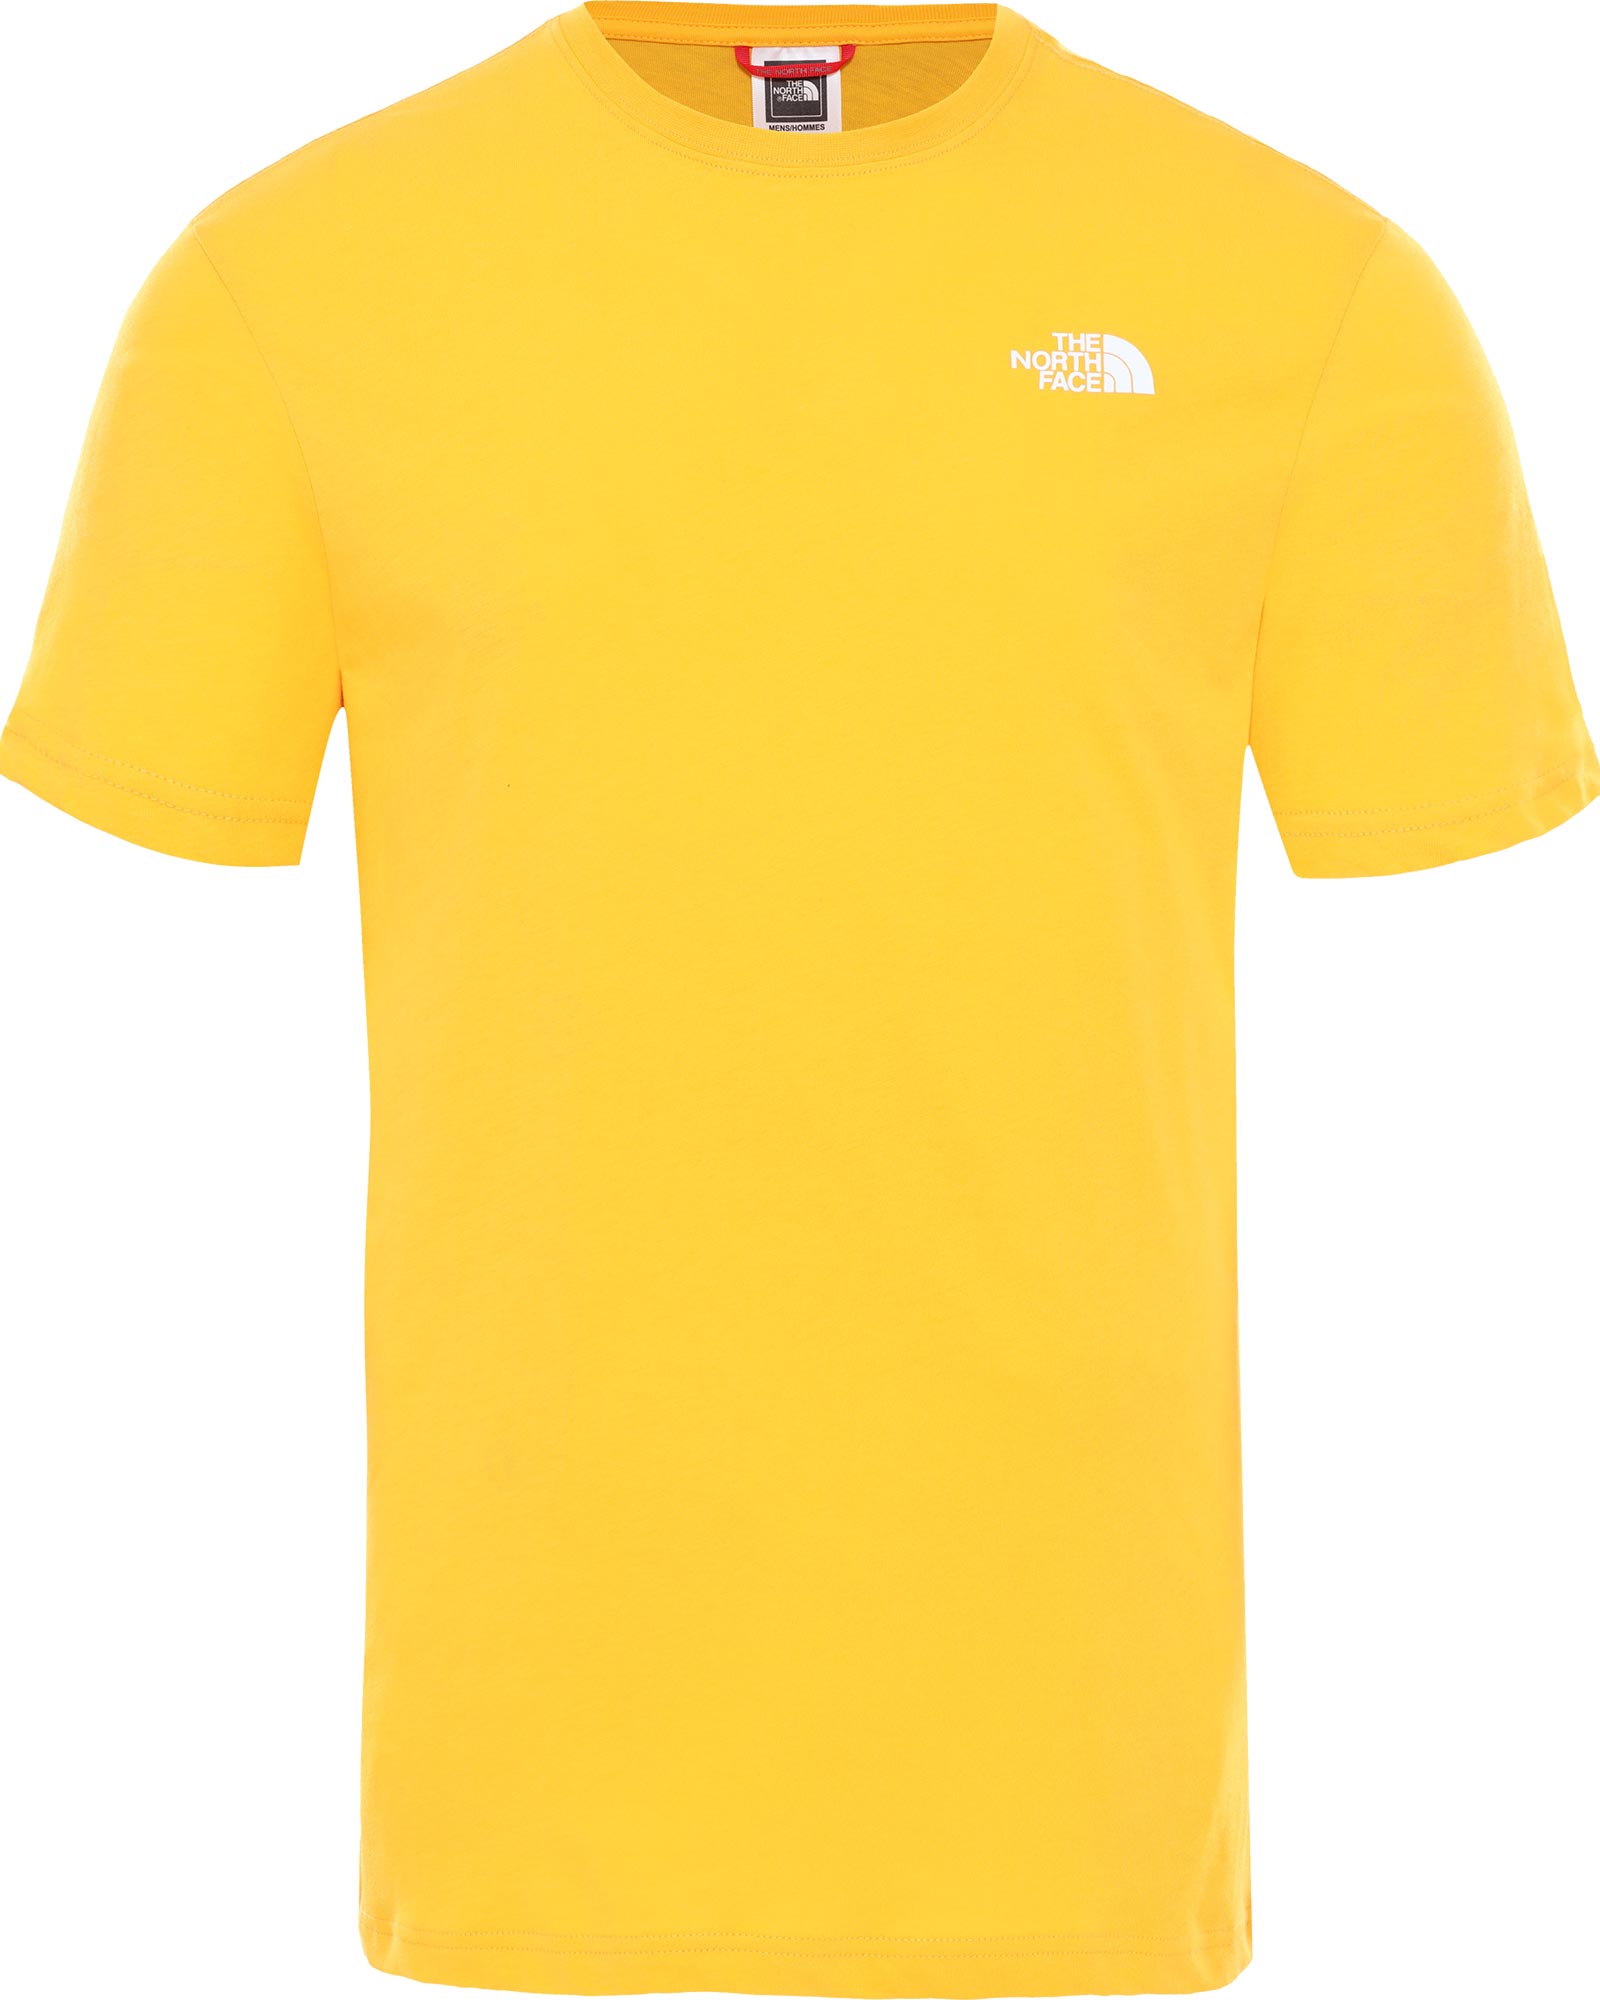 The North Face Red Box Men’s T Shirt - Summit Gold L